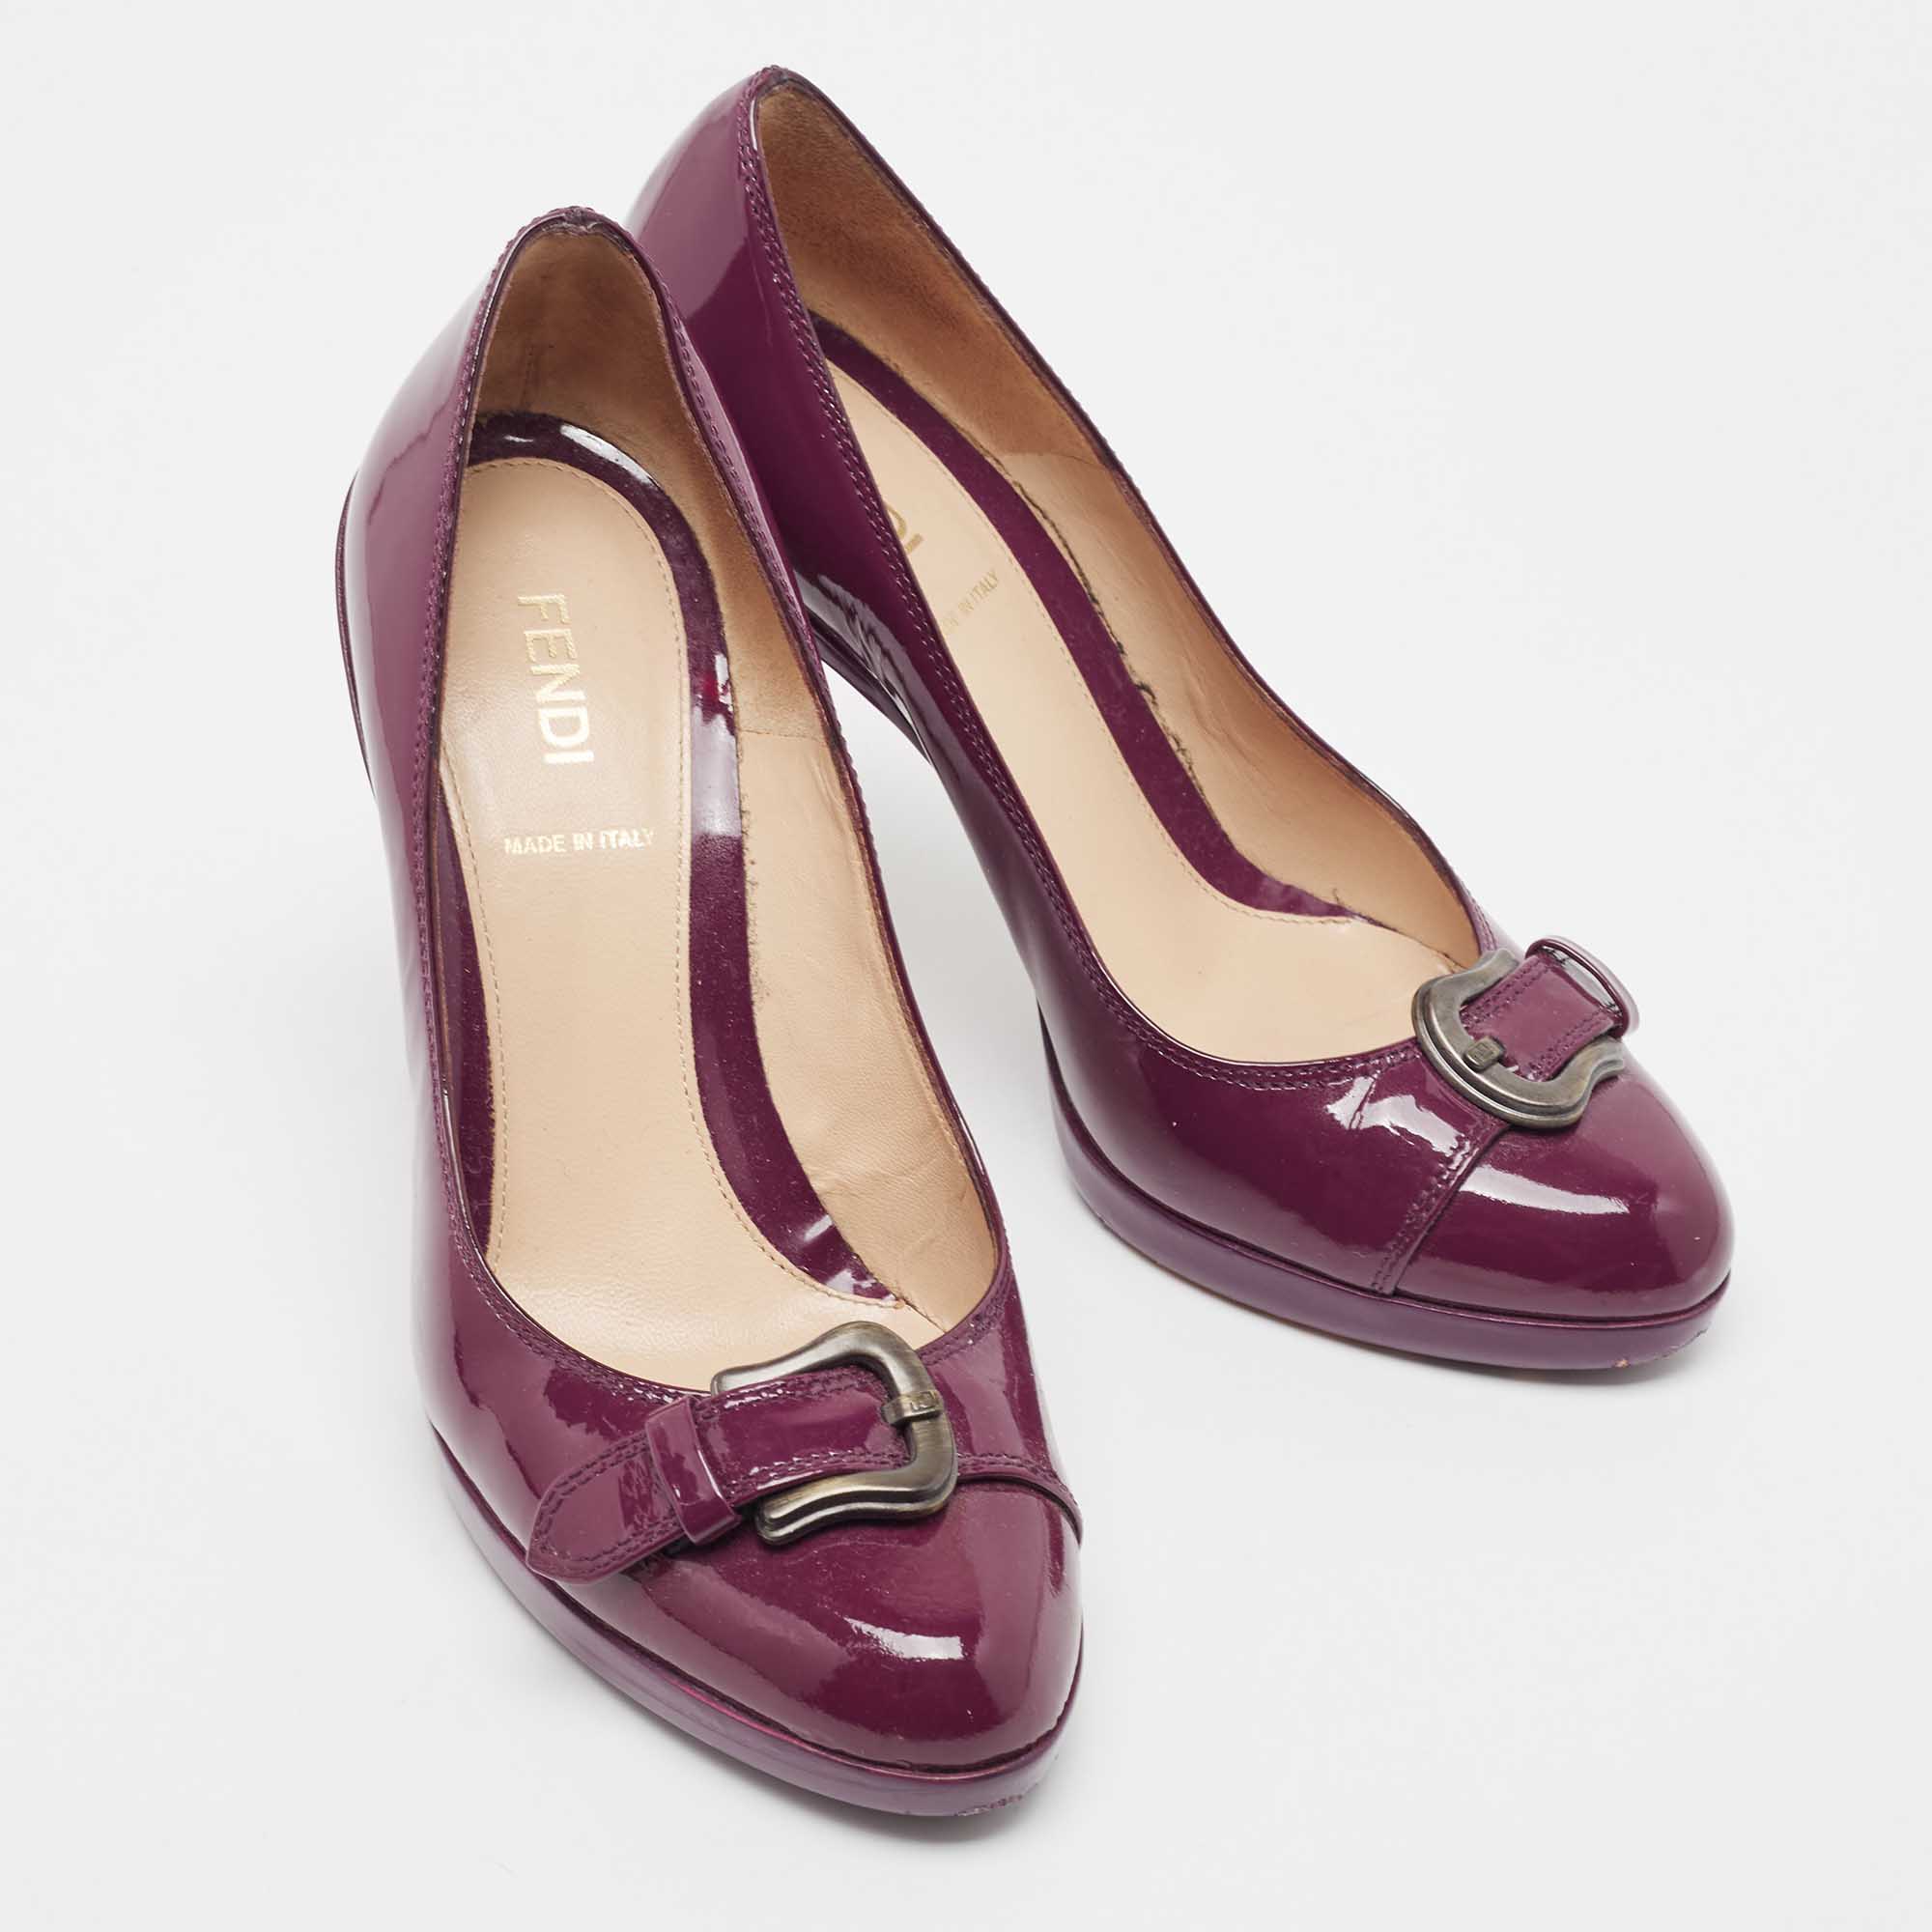 Fendi Burgundy Patent Leather Buckle Detail  Round Toe Pumps Size 36.5